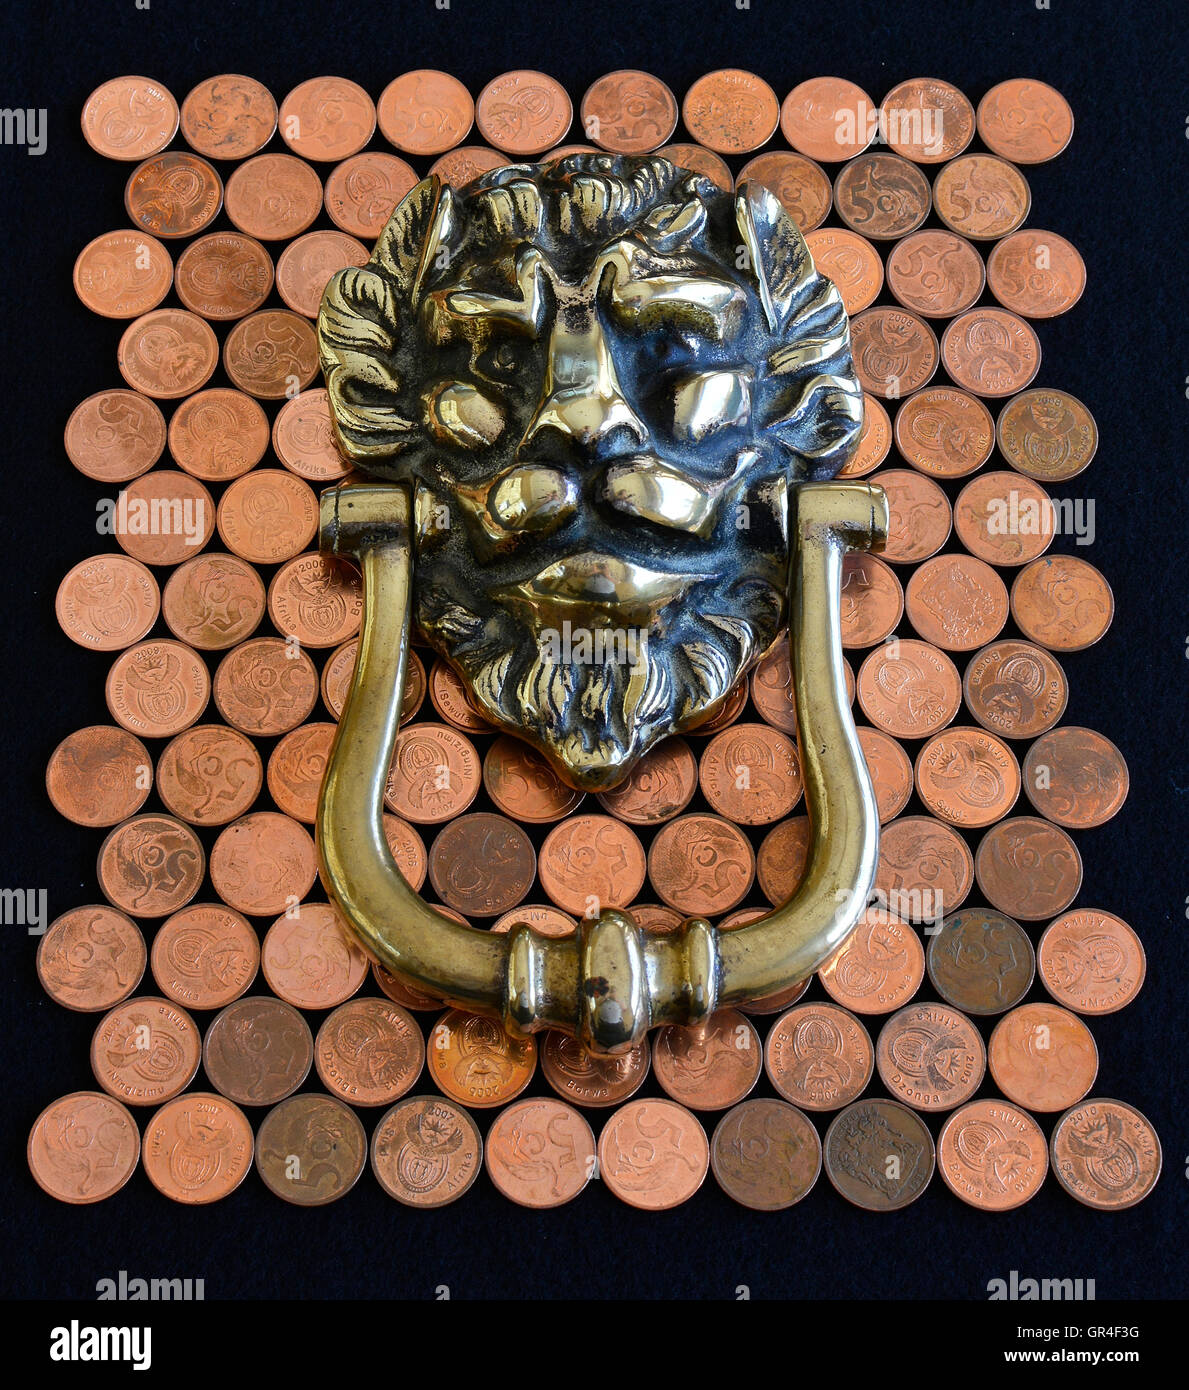 Opportunity knocking. Knocking for opportunity to profit. Brass lion head knocker on copper money. Full distant view. Stock Photo